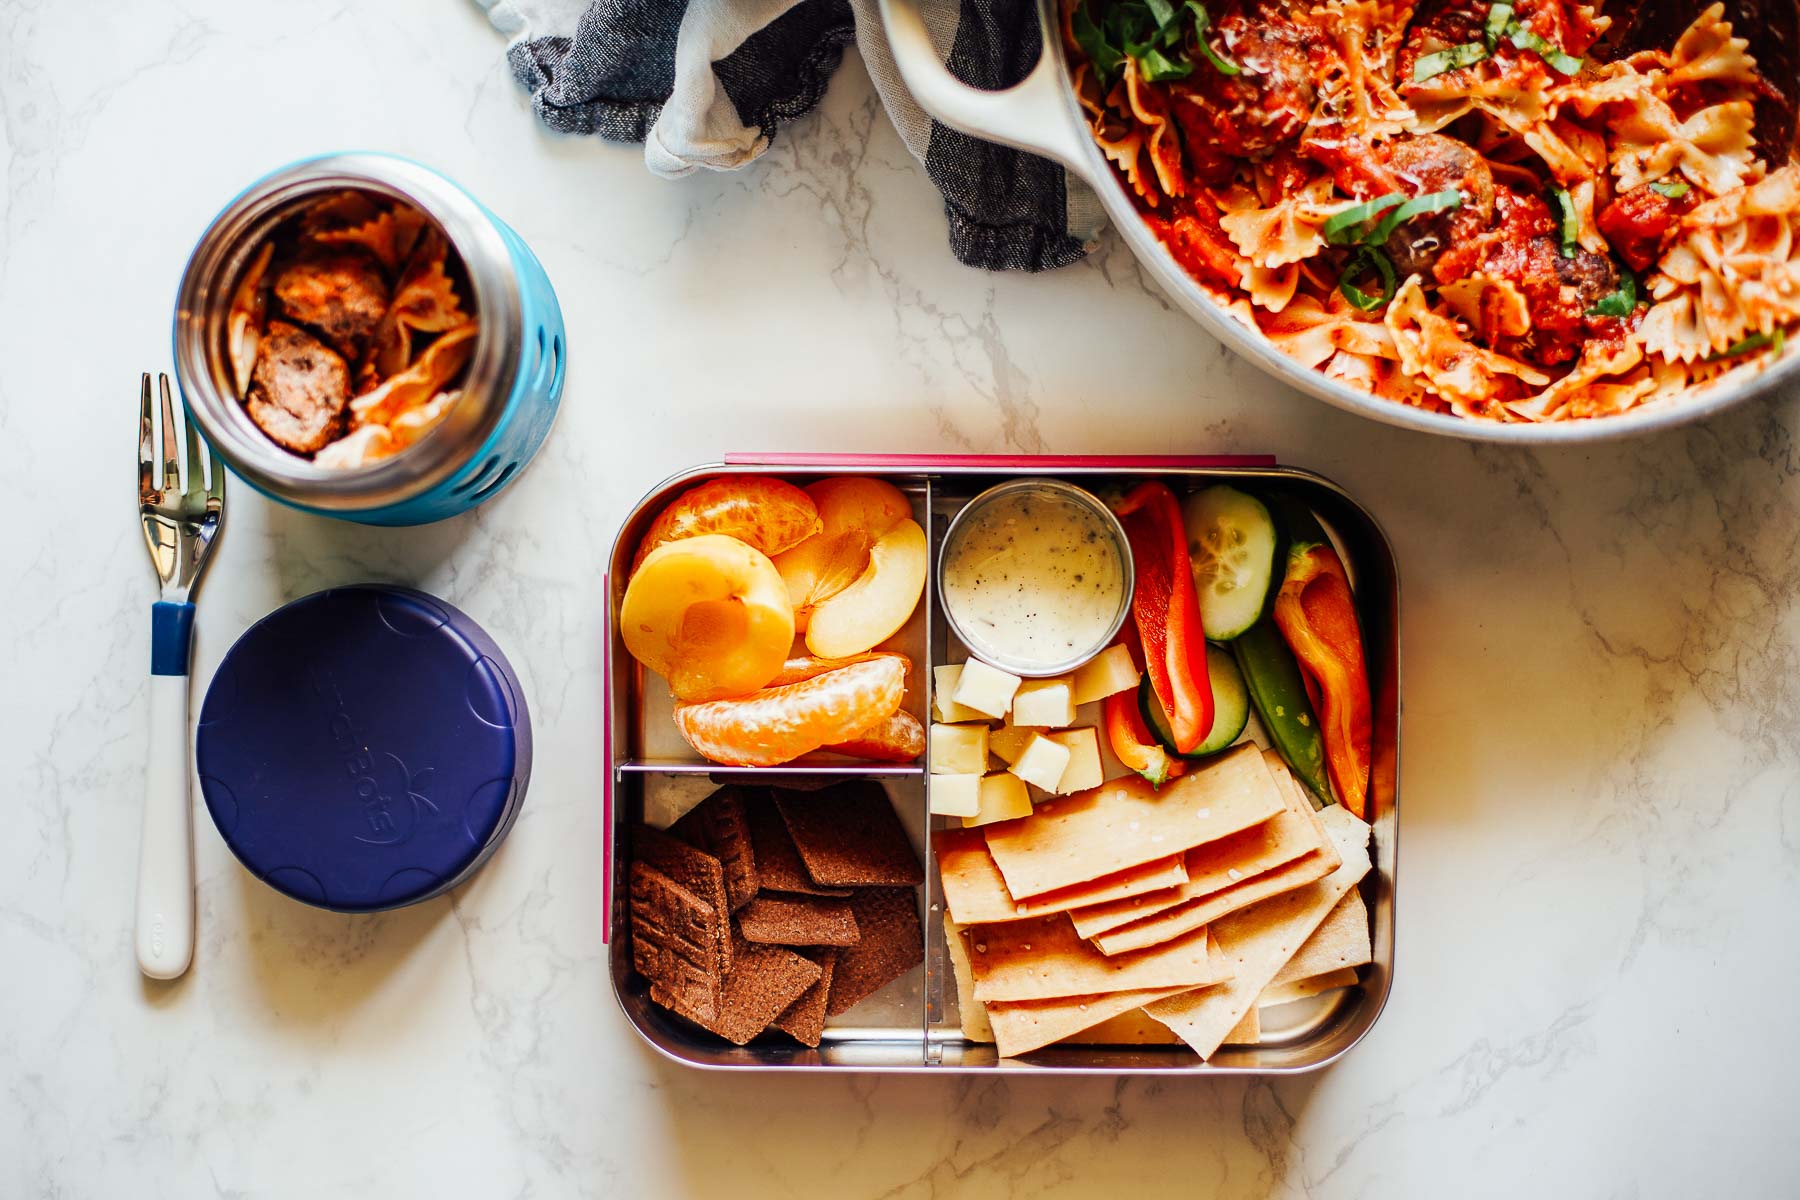 Leftover spagetti in a thermos with crackers, vegetables, apricots, and chocolate cookies in a bento box.